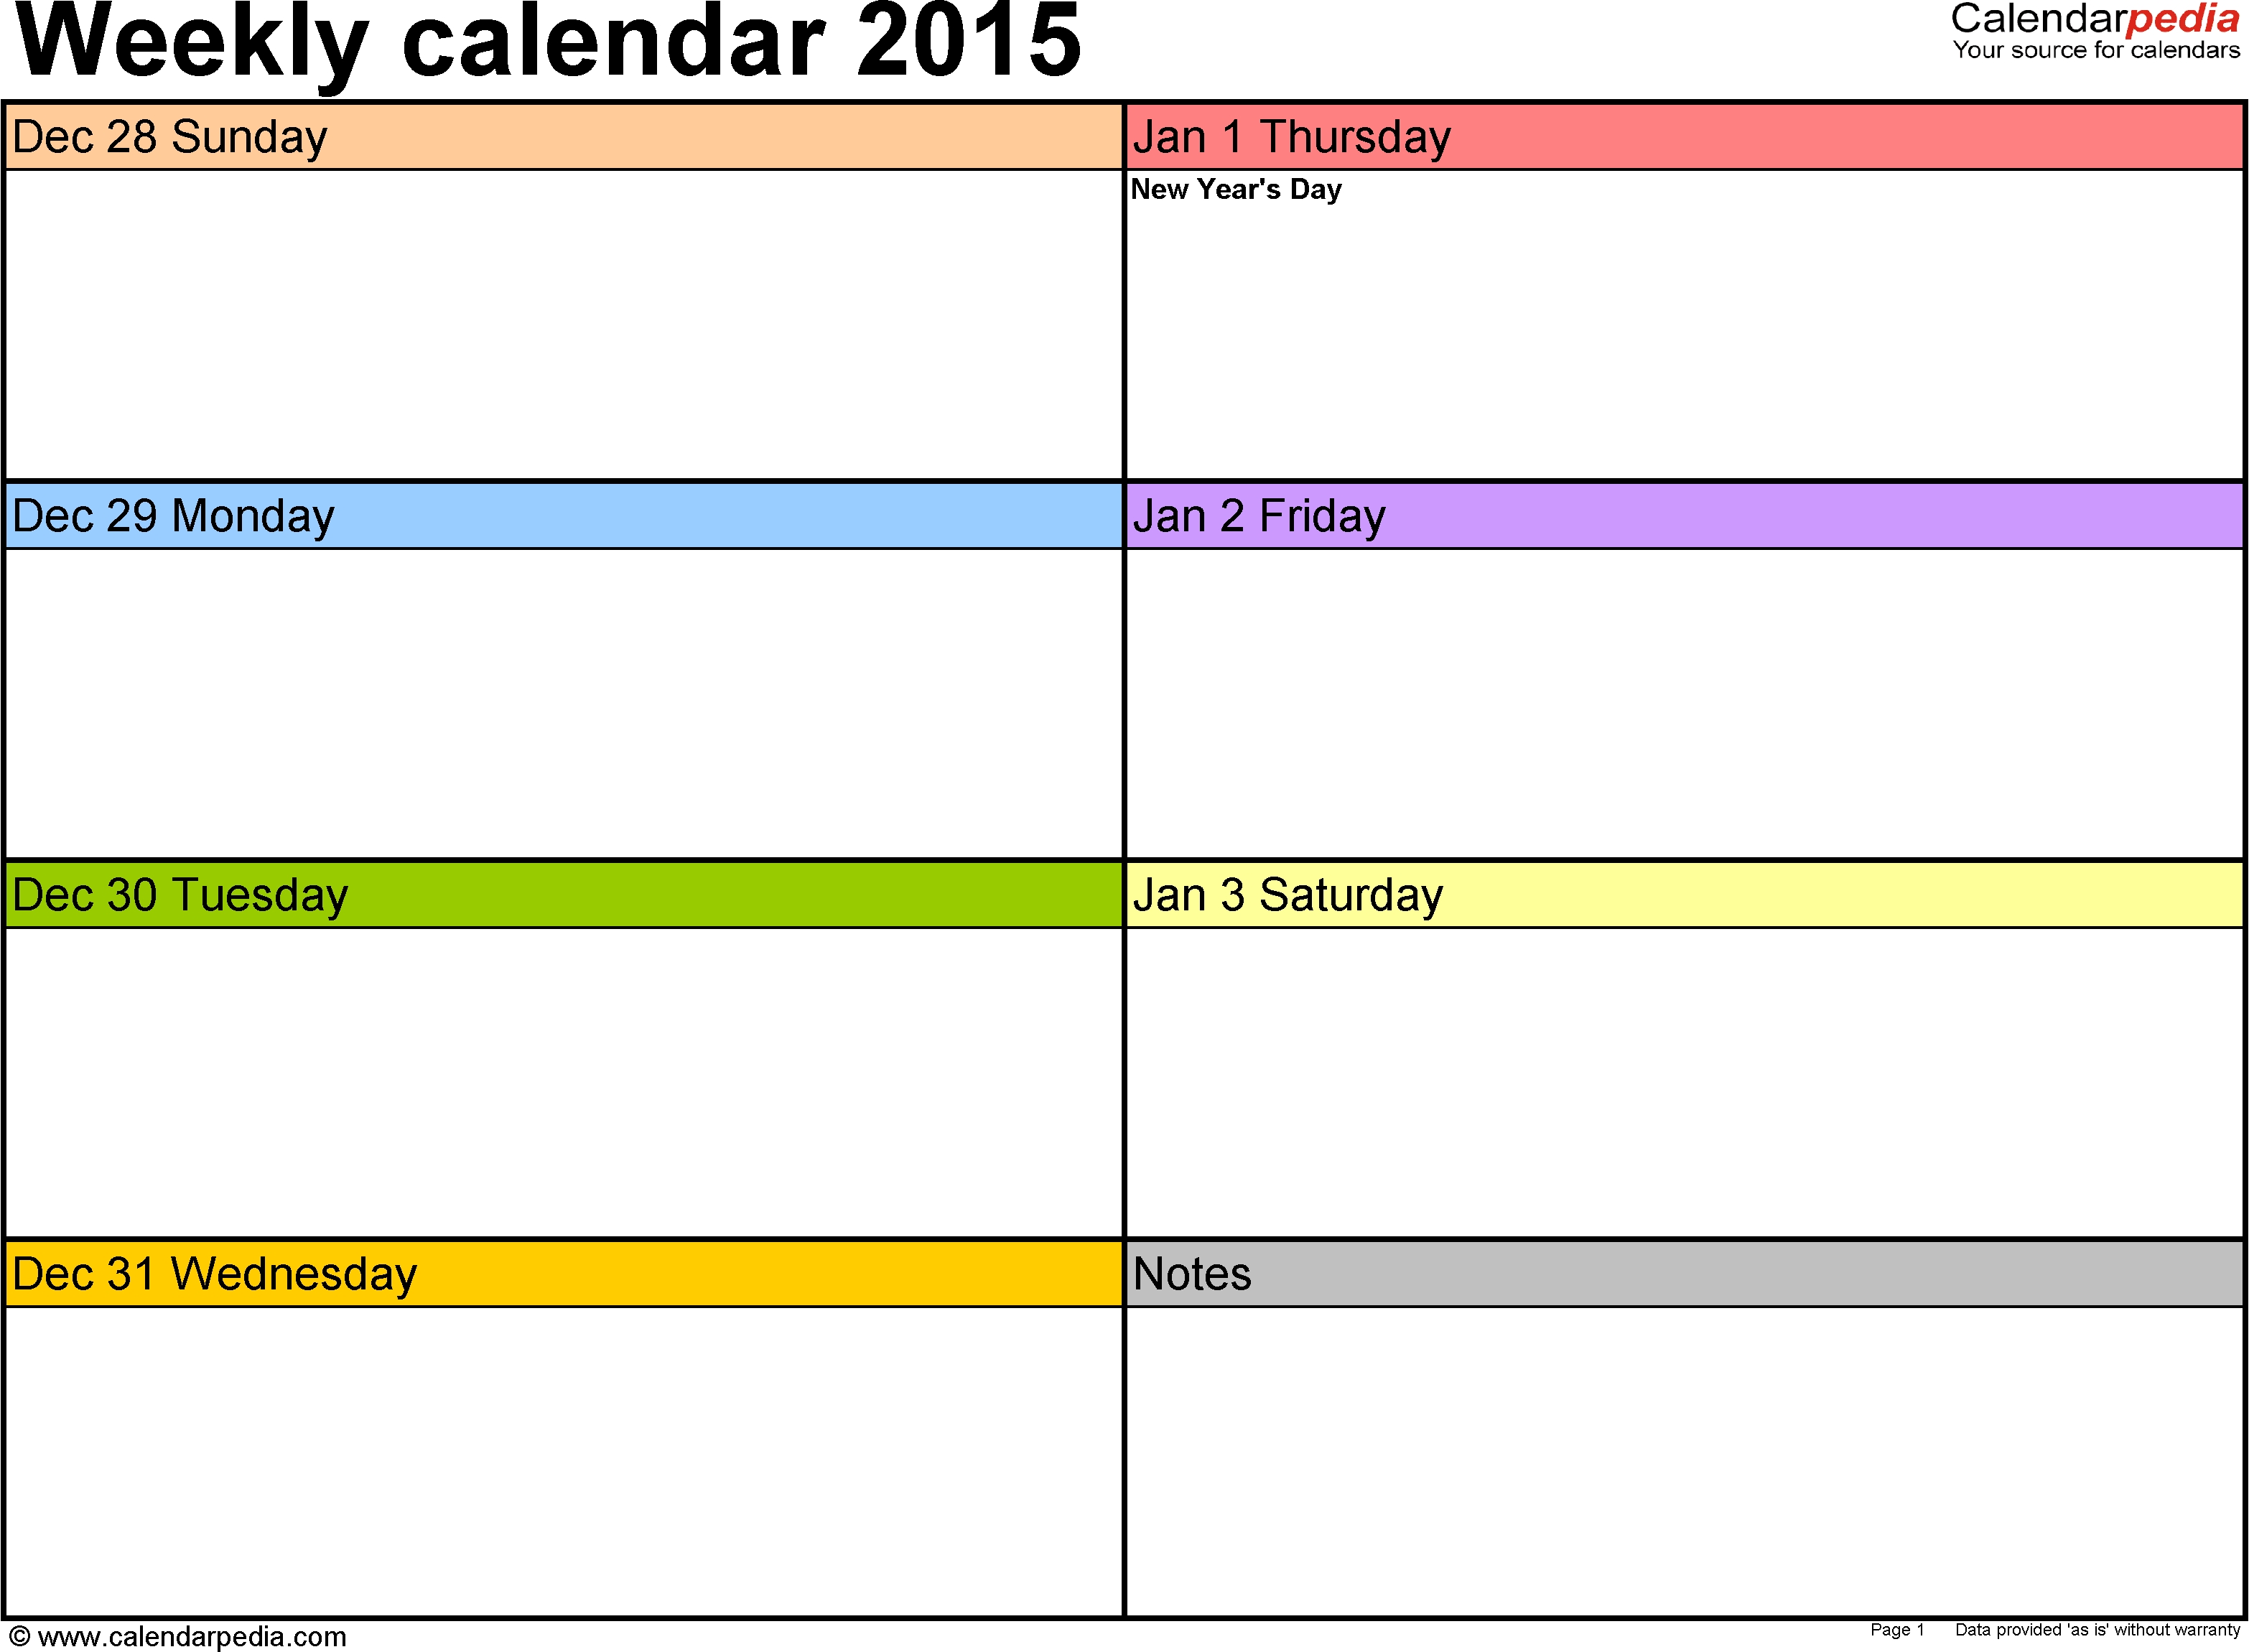 Calendar Printable Images Gallery Category Page 2